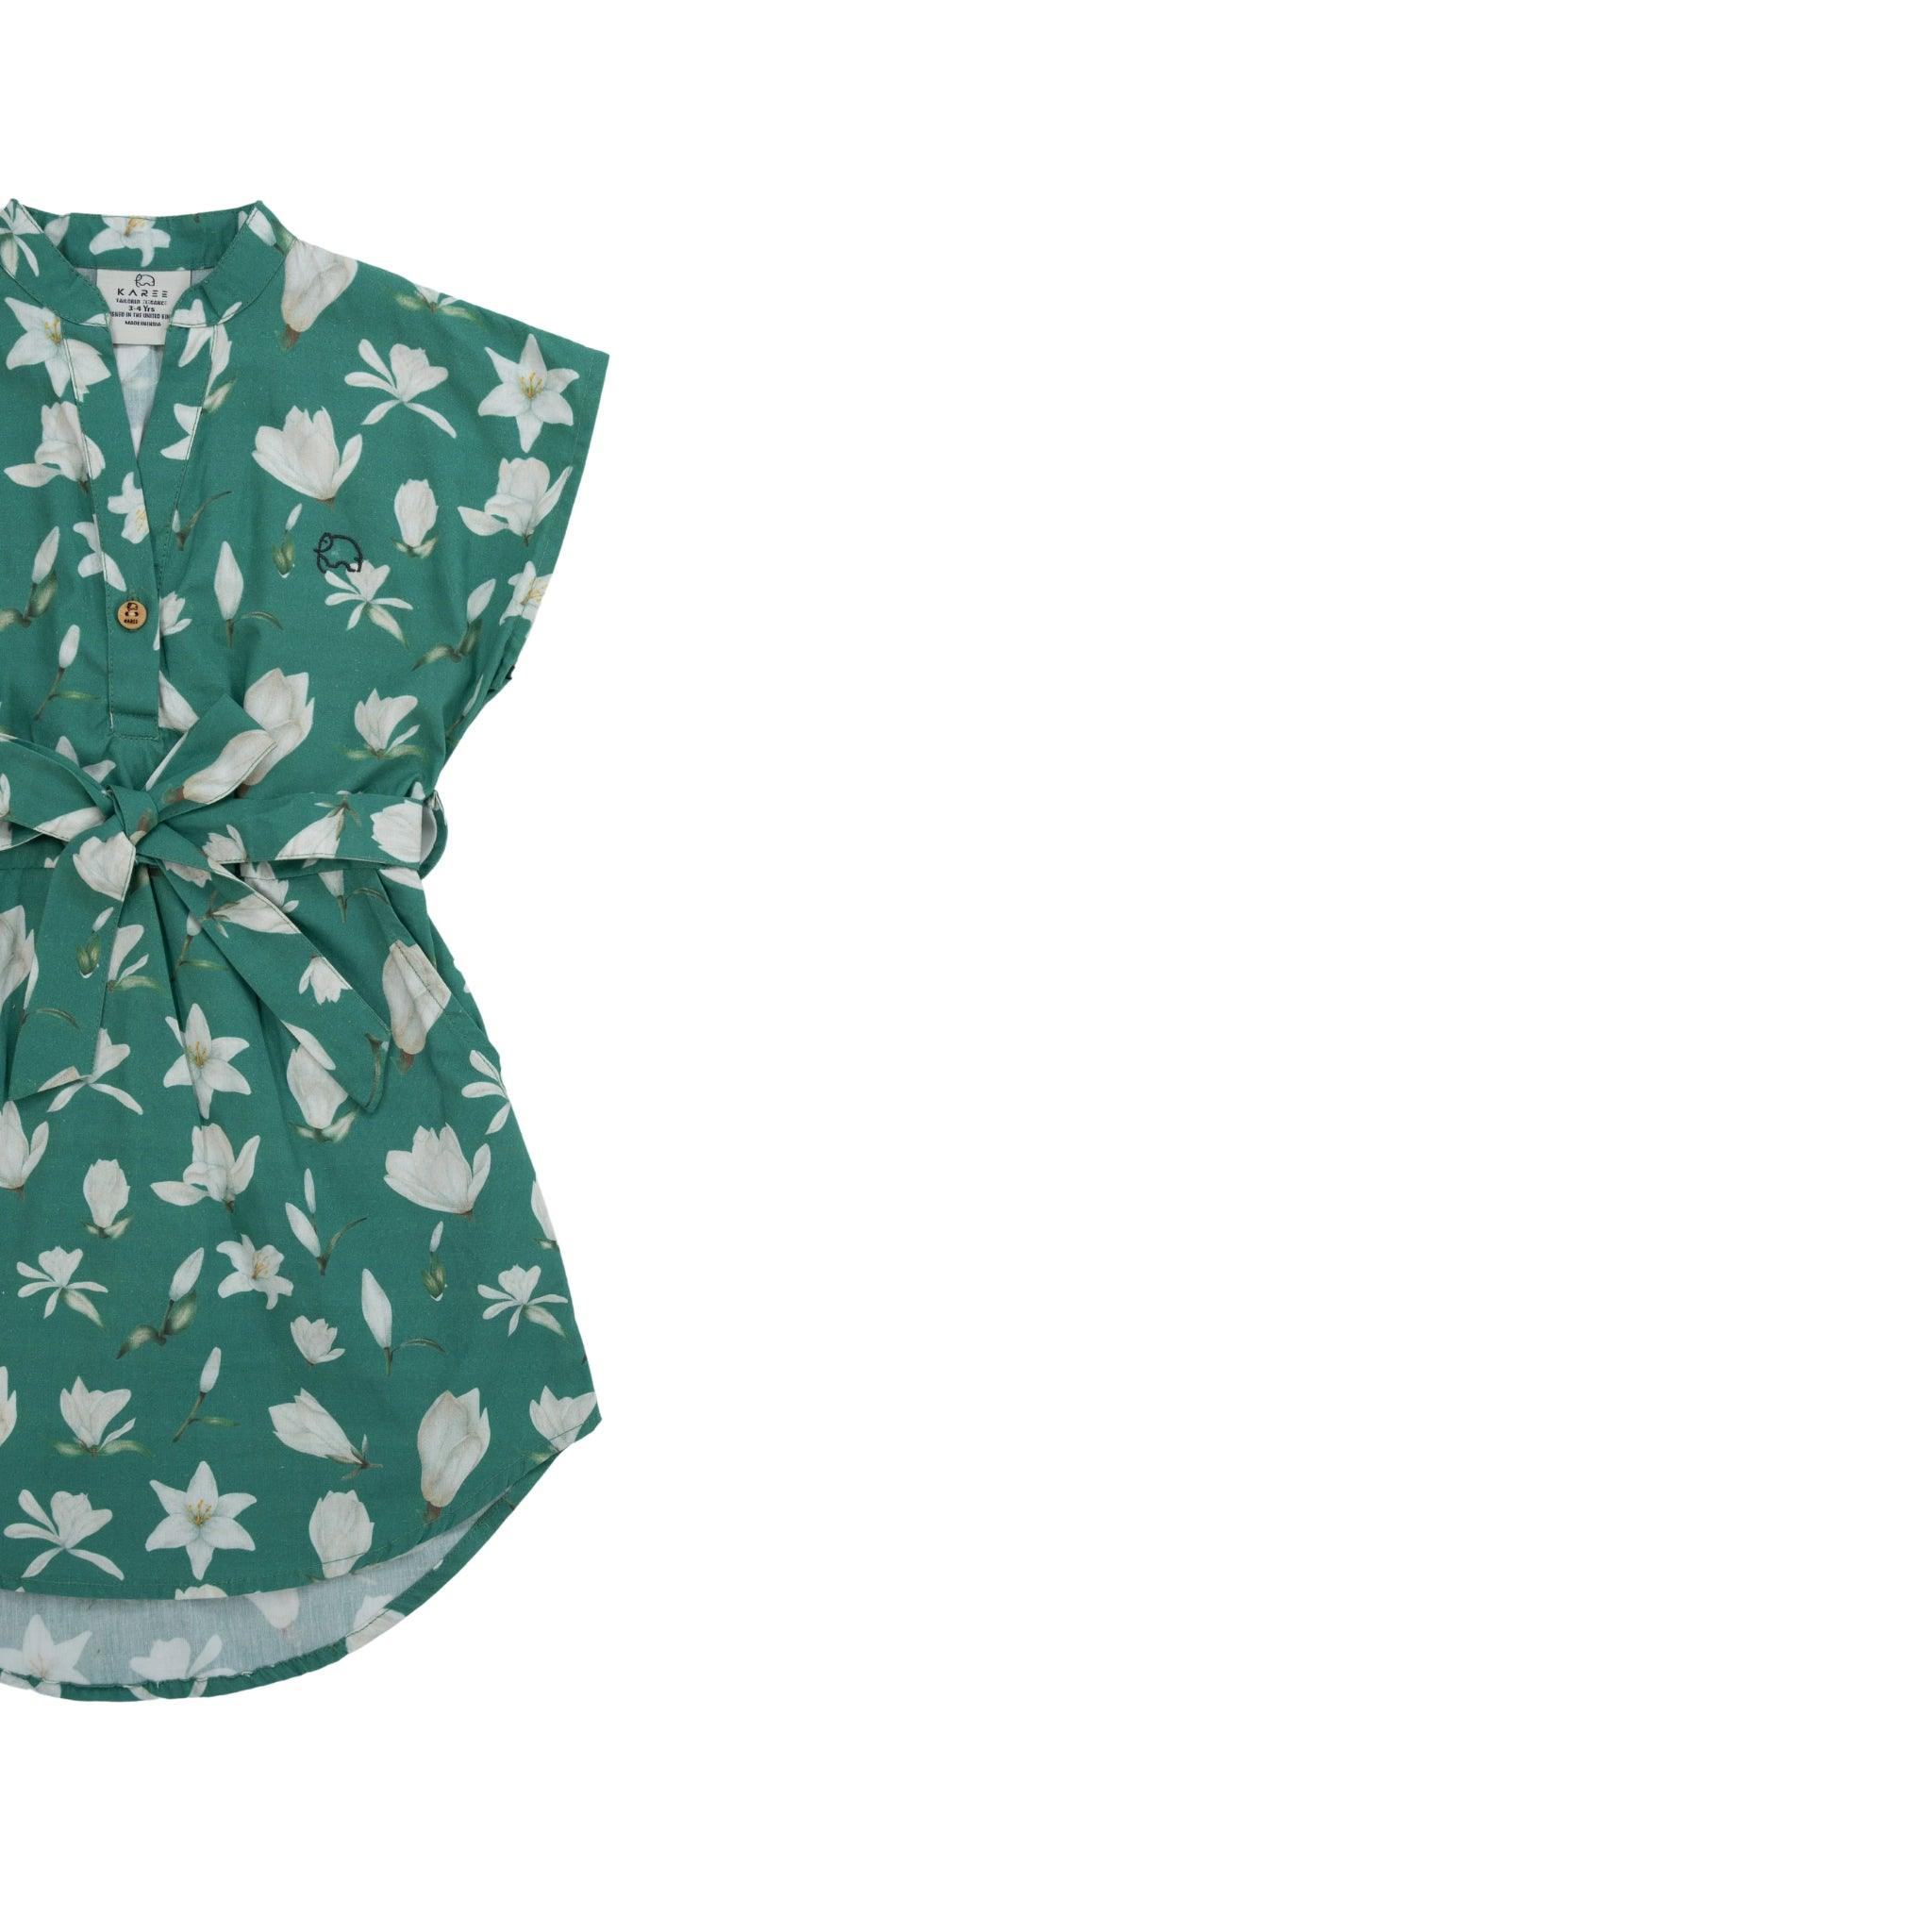 Bottle Green Lilly Blossom Cotton Shirt Dress for Kids by Karee with short sleeves and a tie waist, displayed against a white background.